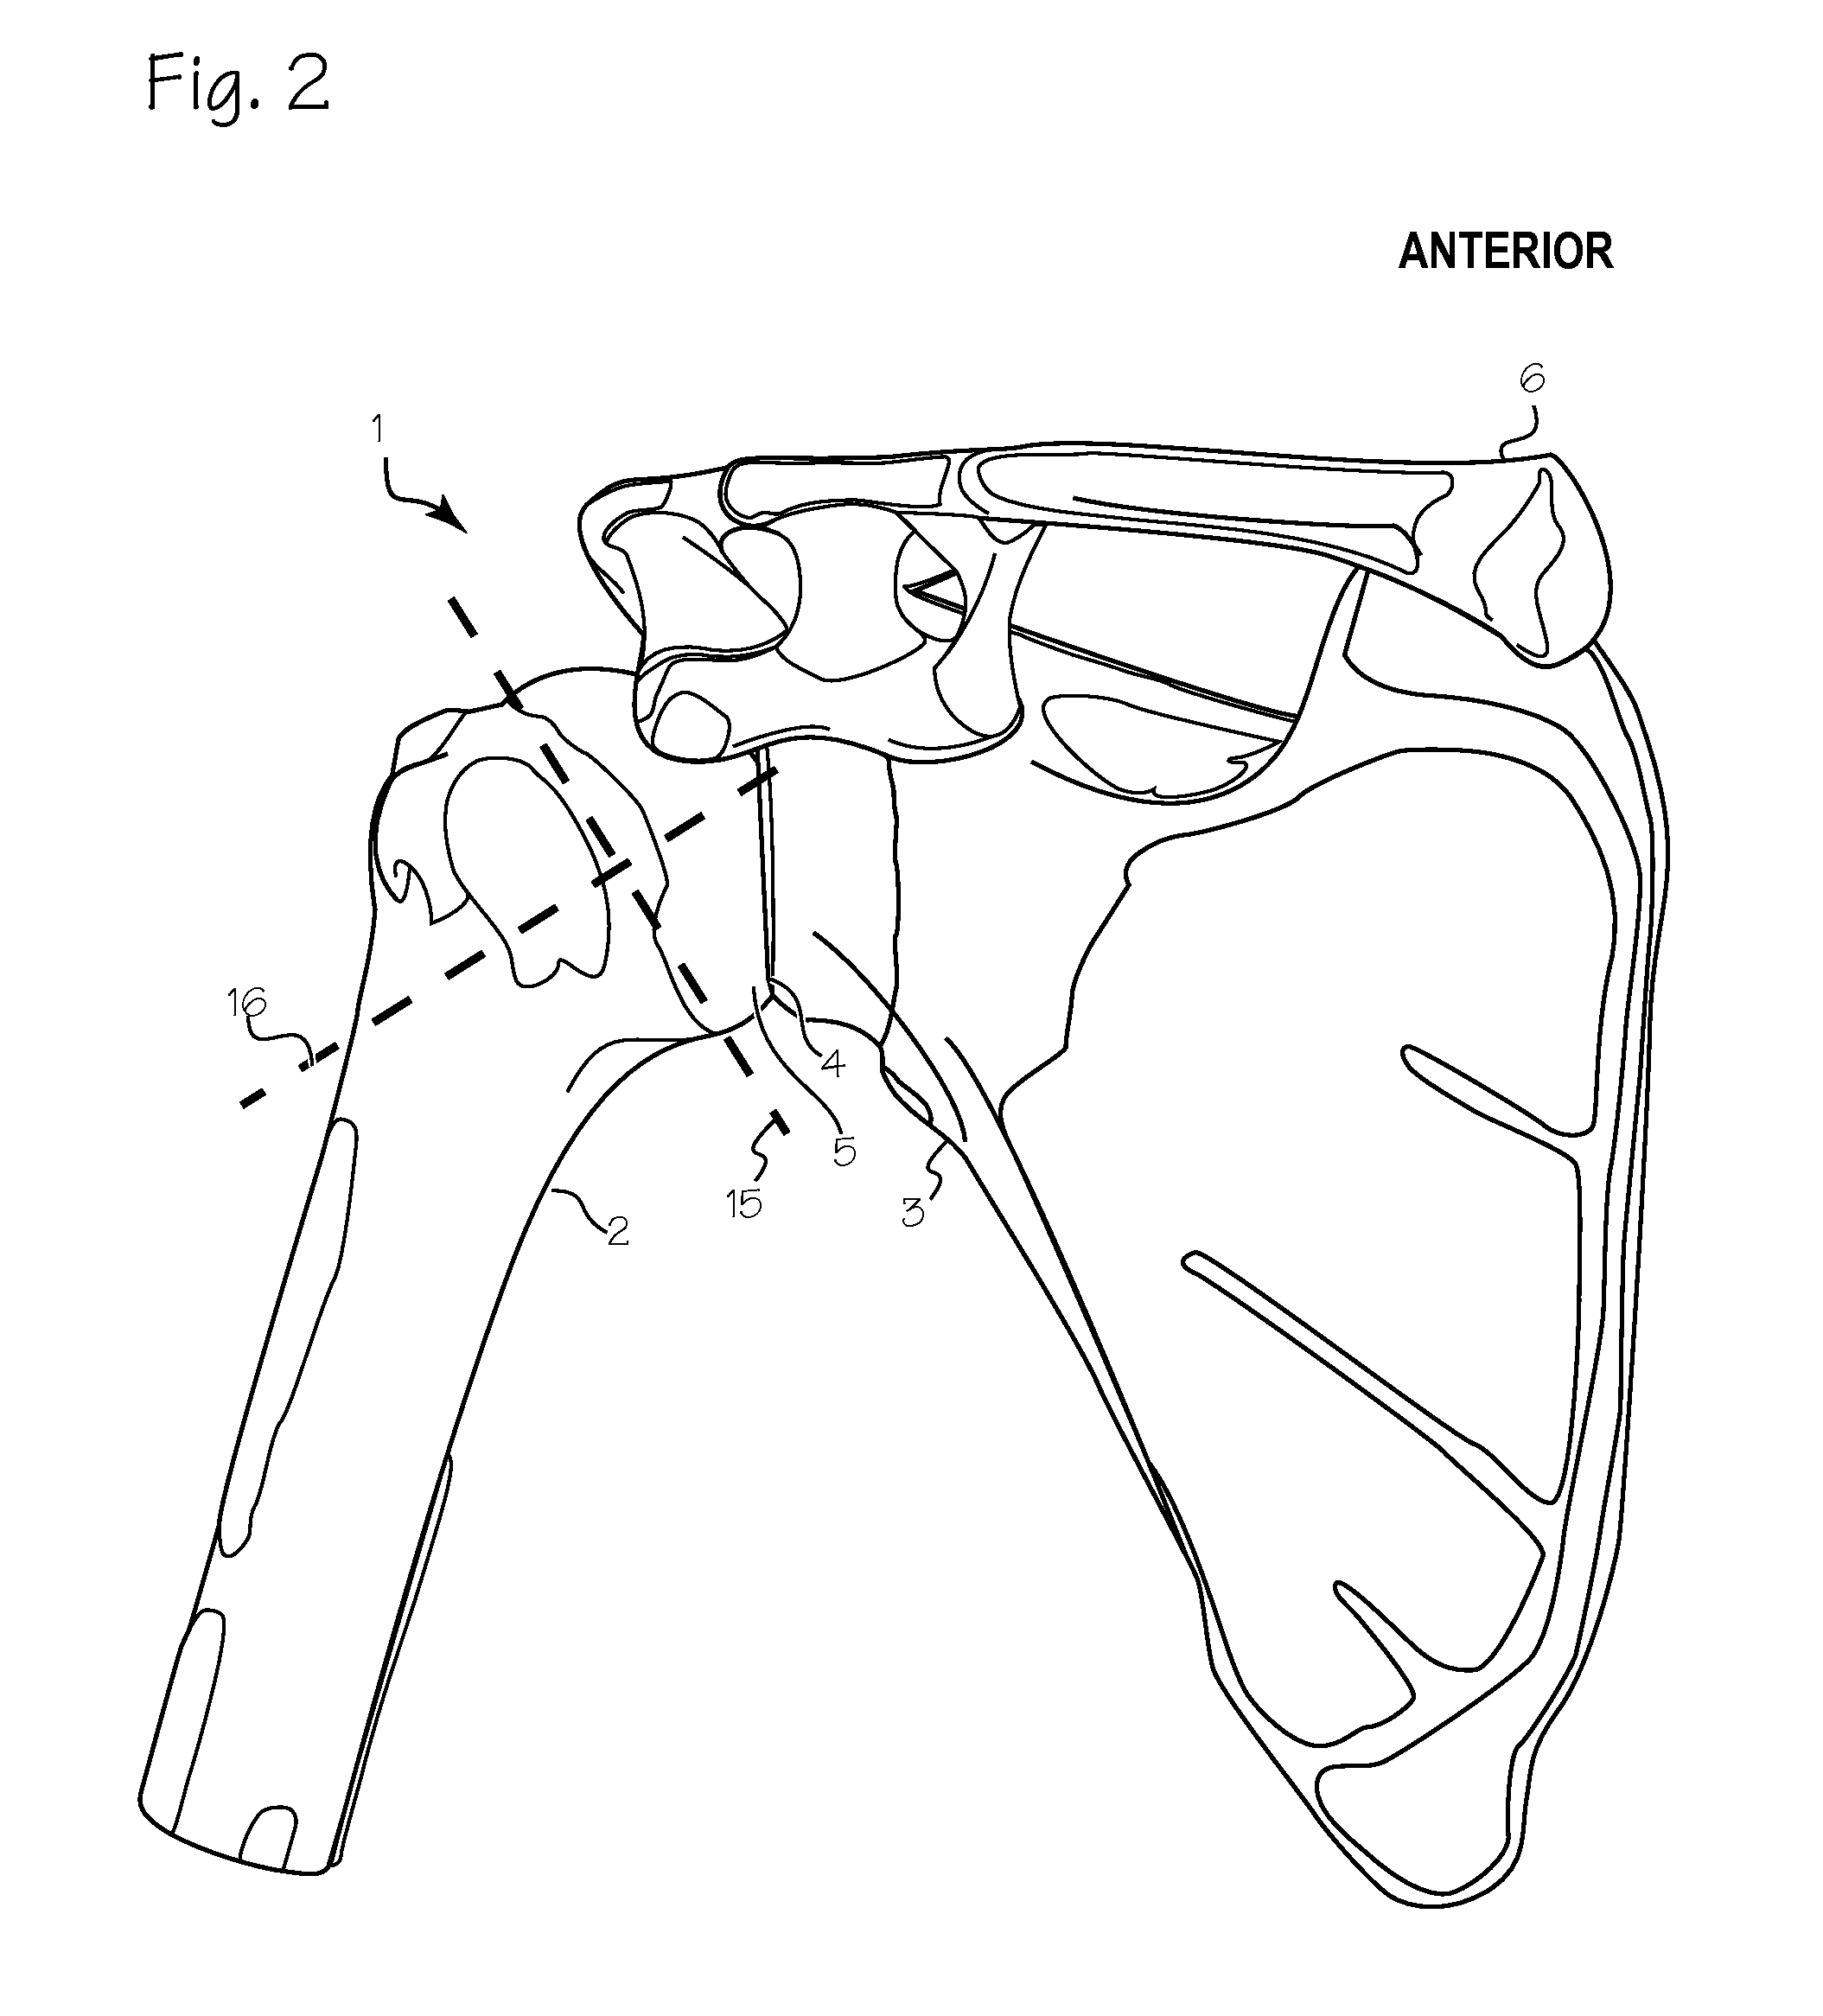 Method of Humeral Head Resurfacing and/or Replacement and System for Accomplishing the Method